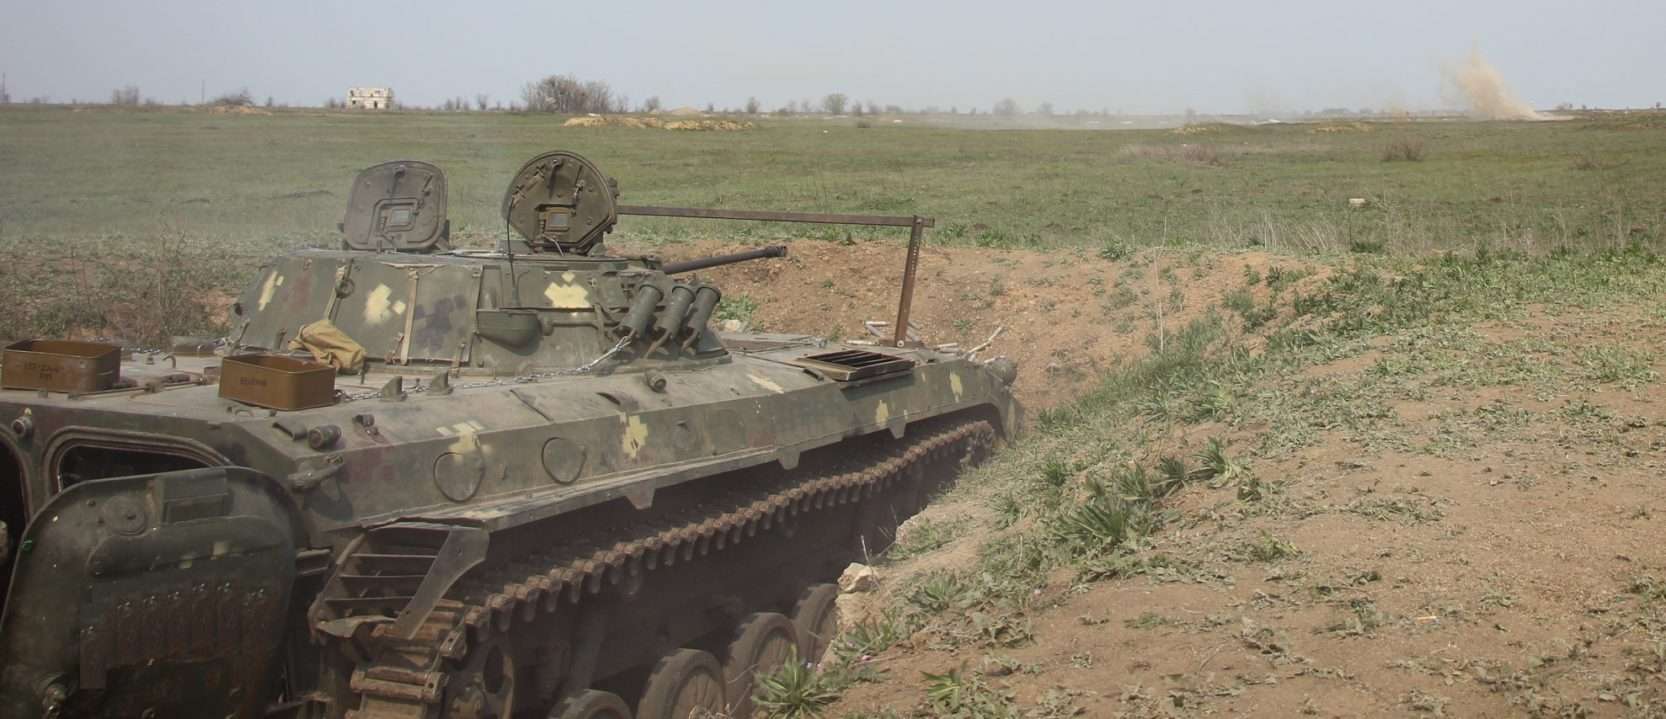 Future Reconnaissance Officers Destroyed Imaginary Adversary from BMP-2